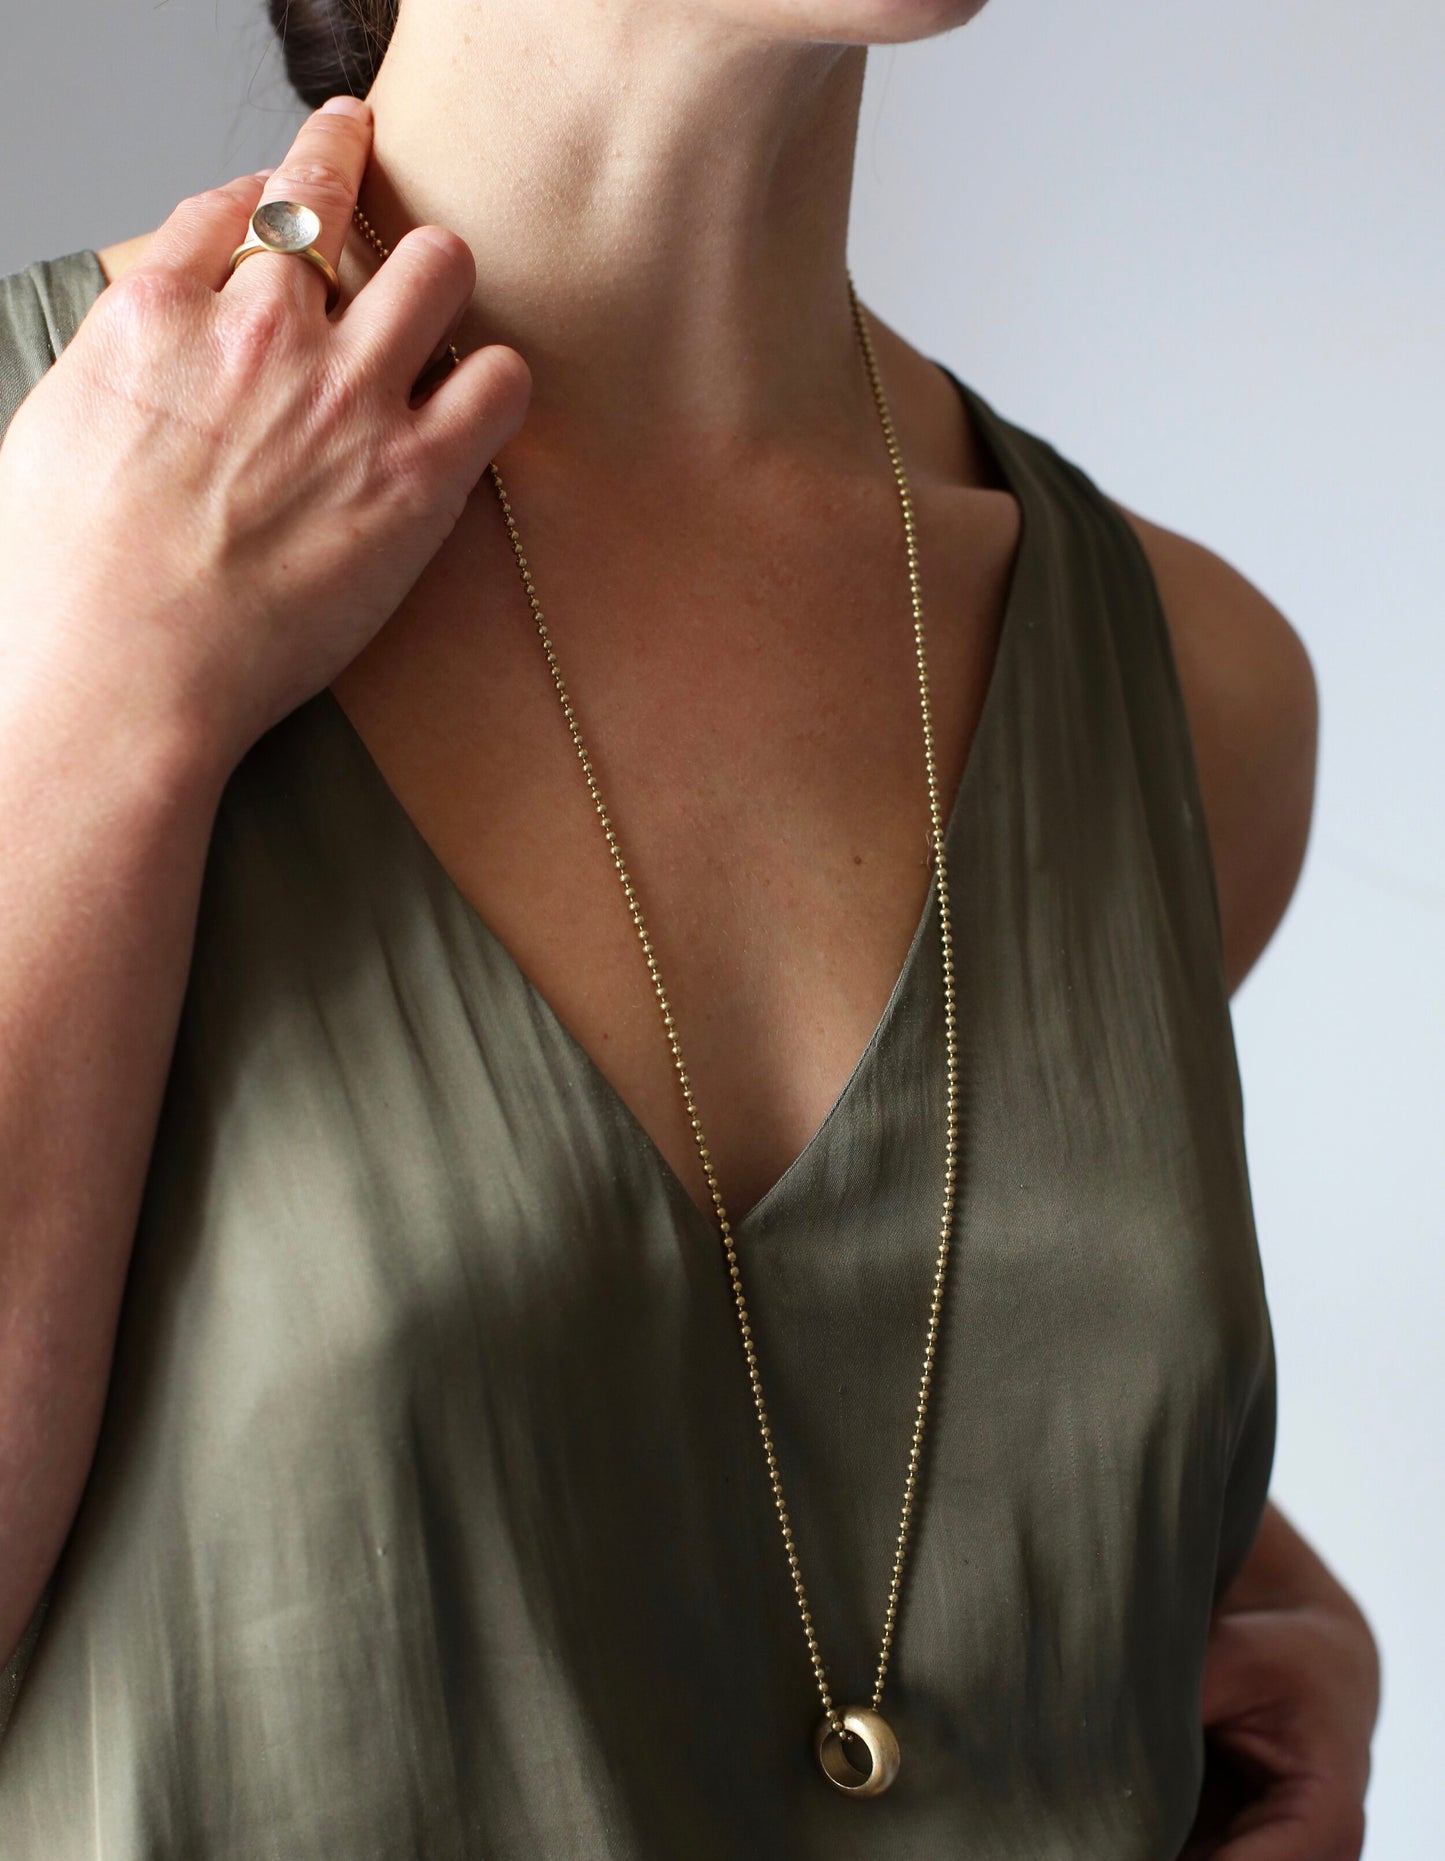 Delilah Pendant: a gorgeous handmade pendant with a tactile weighty solid brass ring on a vintage brass ball chain - strikingly simple. Worn by a model.